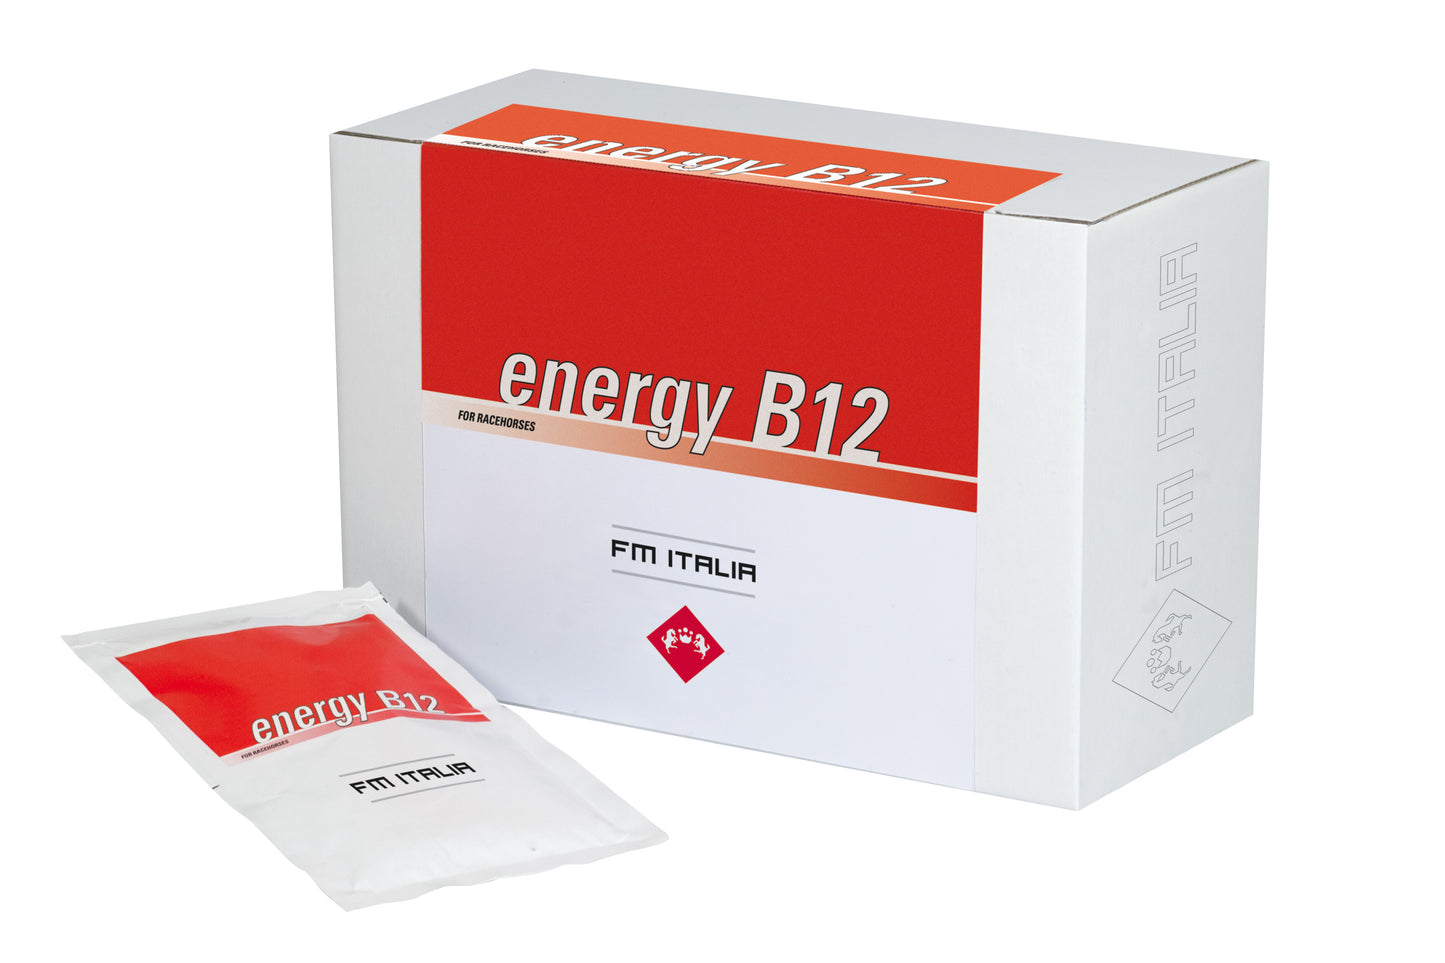 ENERGY B12 | Powder Complementary Feed for Sports Activity Vitamin B12 Needs